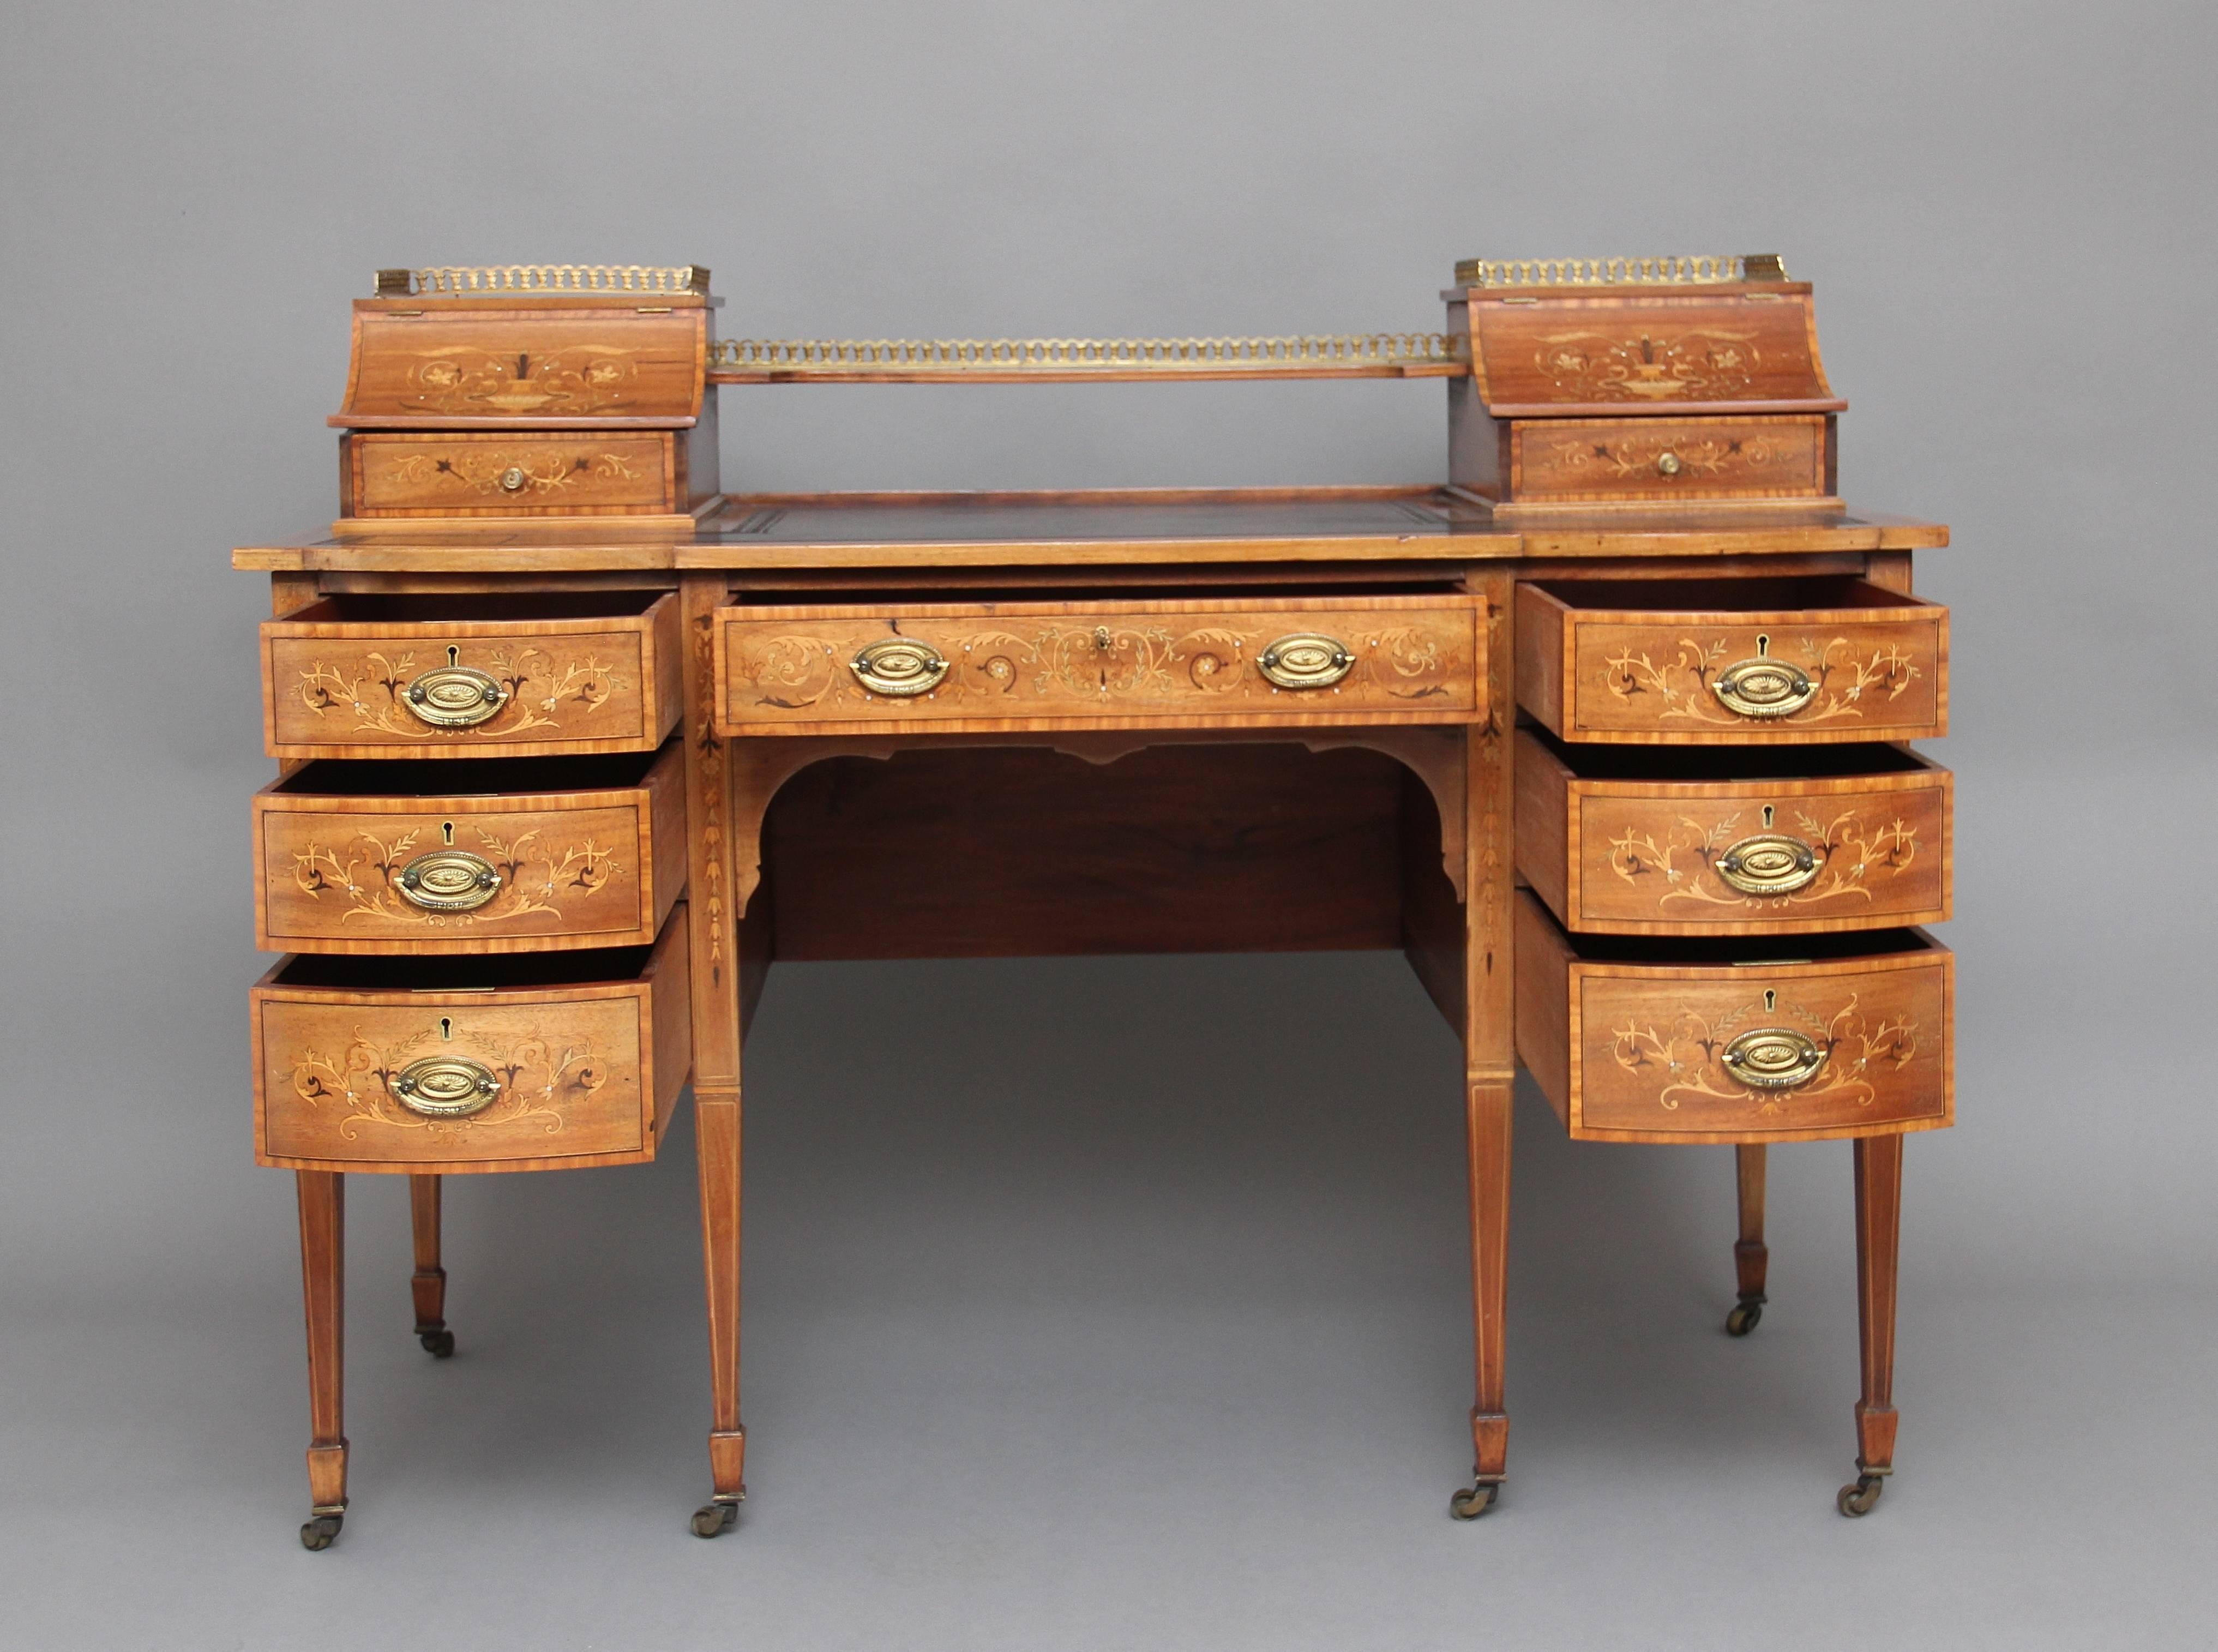 Early 20th century mahogany inlaid desk, the top having a shelf flanked either side by concave hinged stationary compartments beautifully inlaid with scrolling flowers and urns, each with a drawer, one fitted with a pair of inkwells, the other with